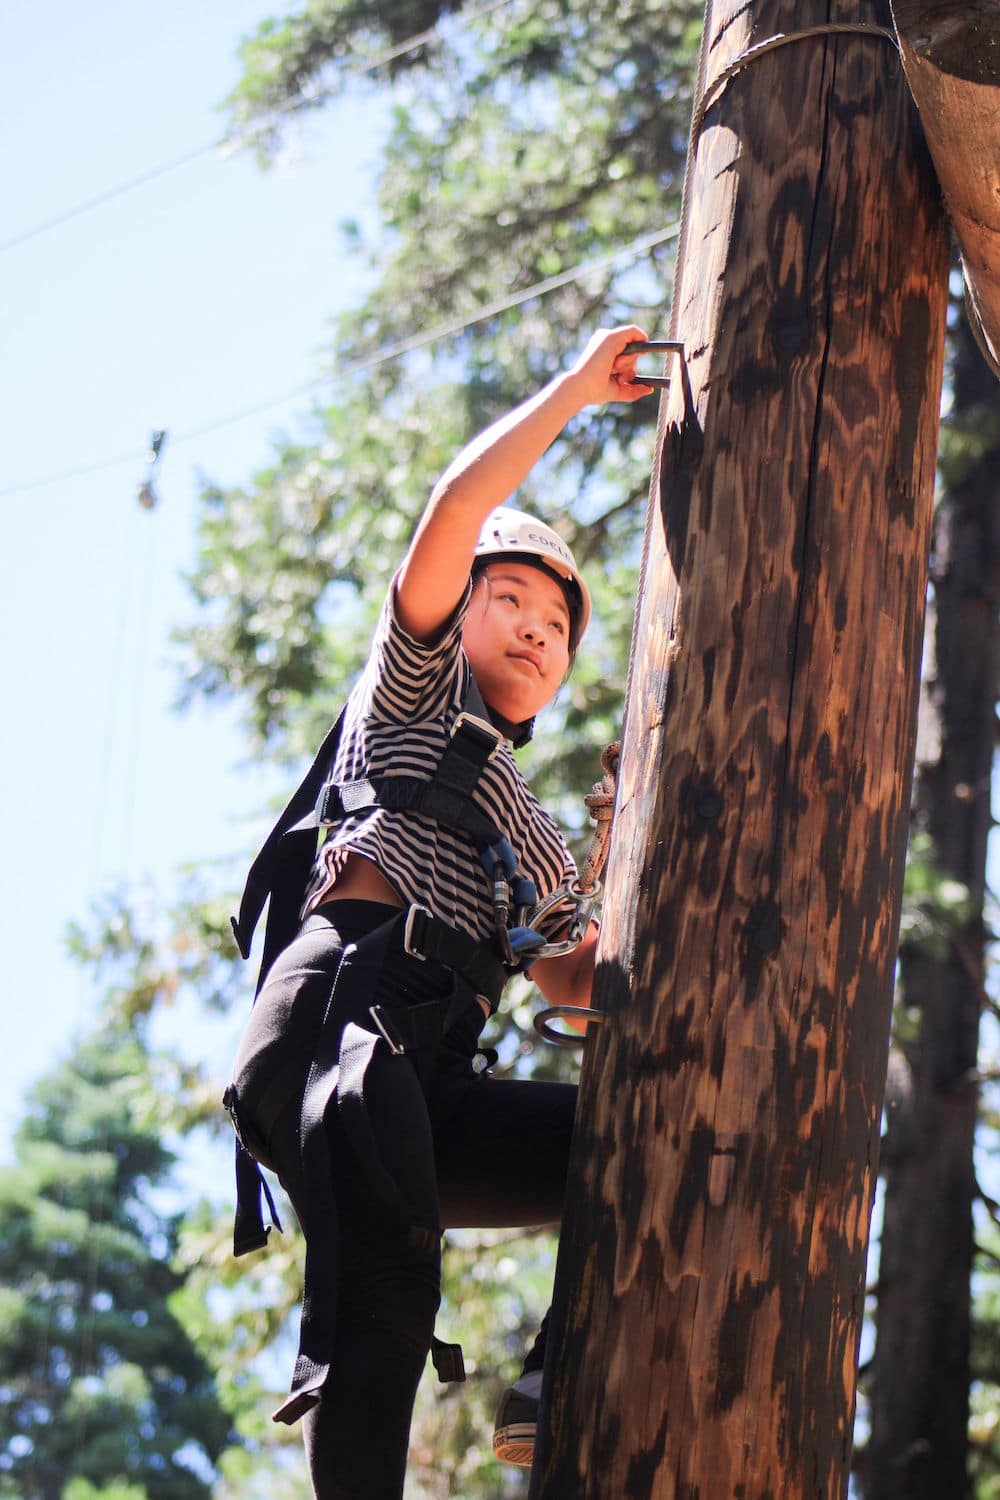 Camper climbing on high ropes course